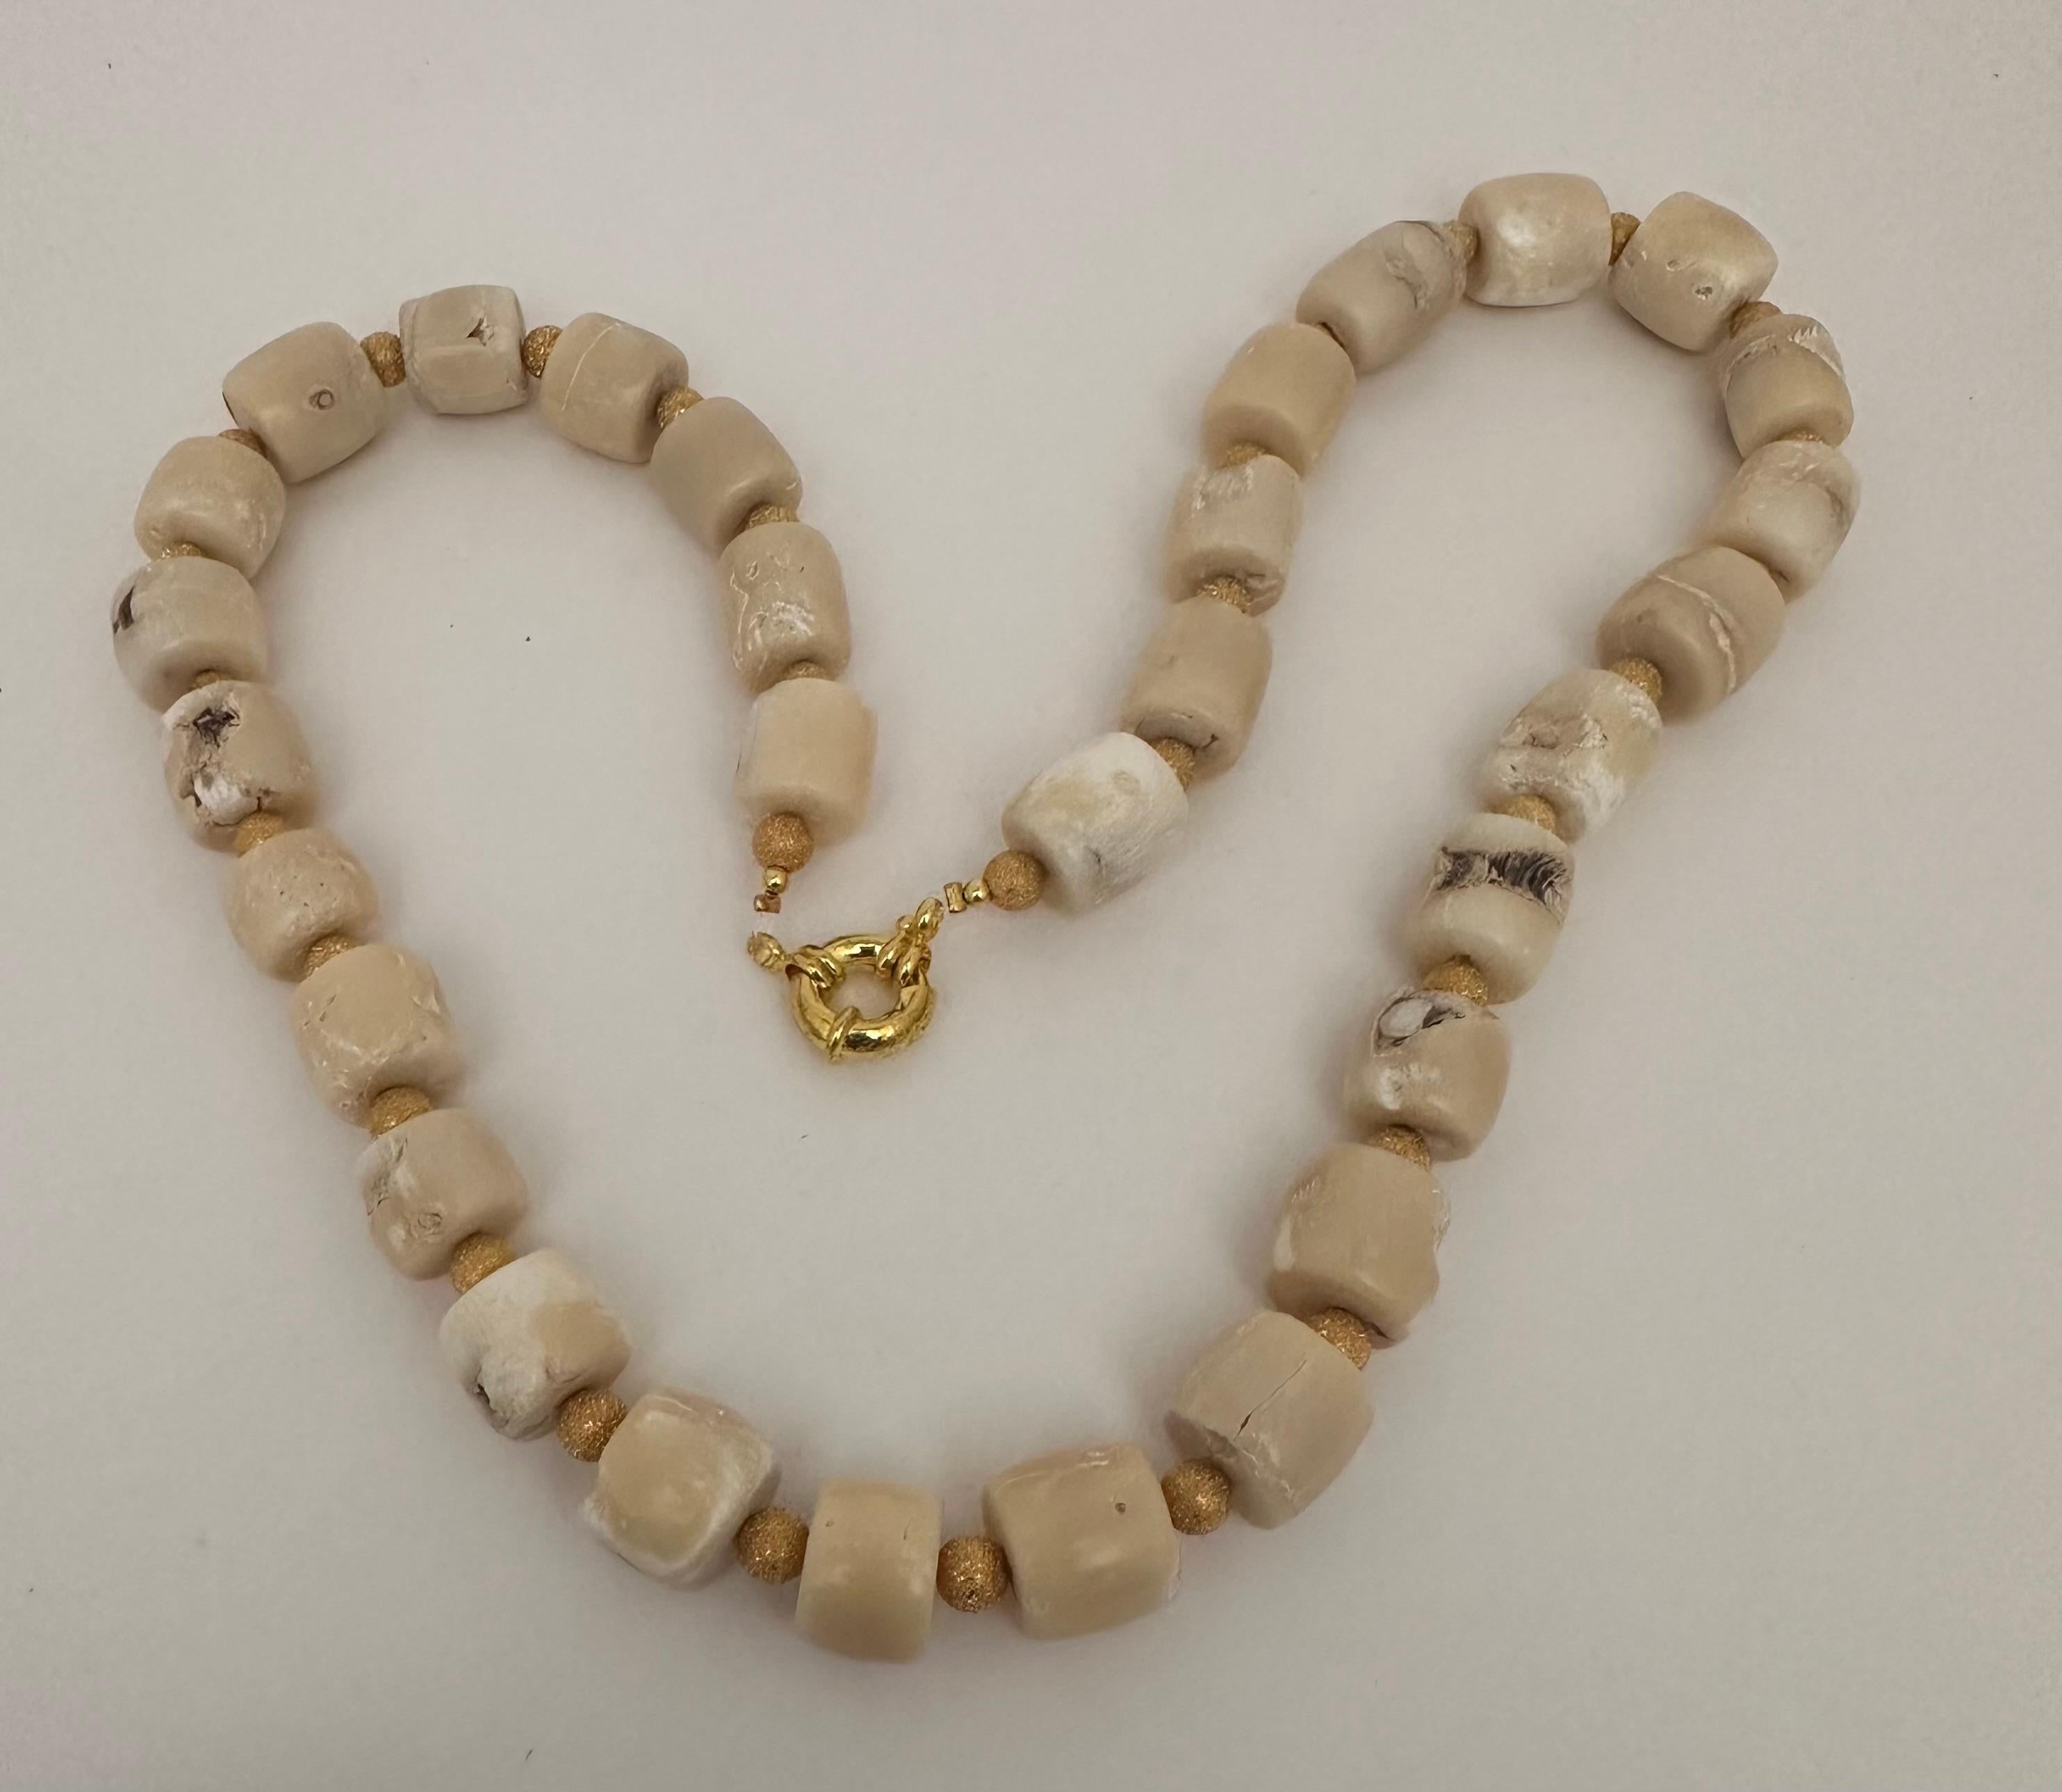 Handmade Gold Plated Beads & White Barrel Shape Coral Beaded 25